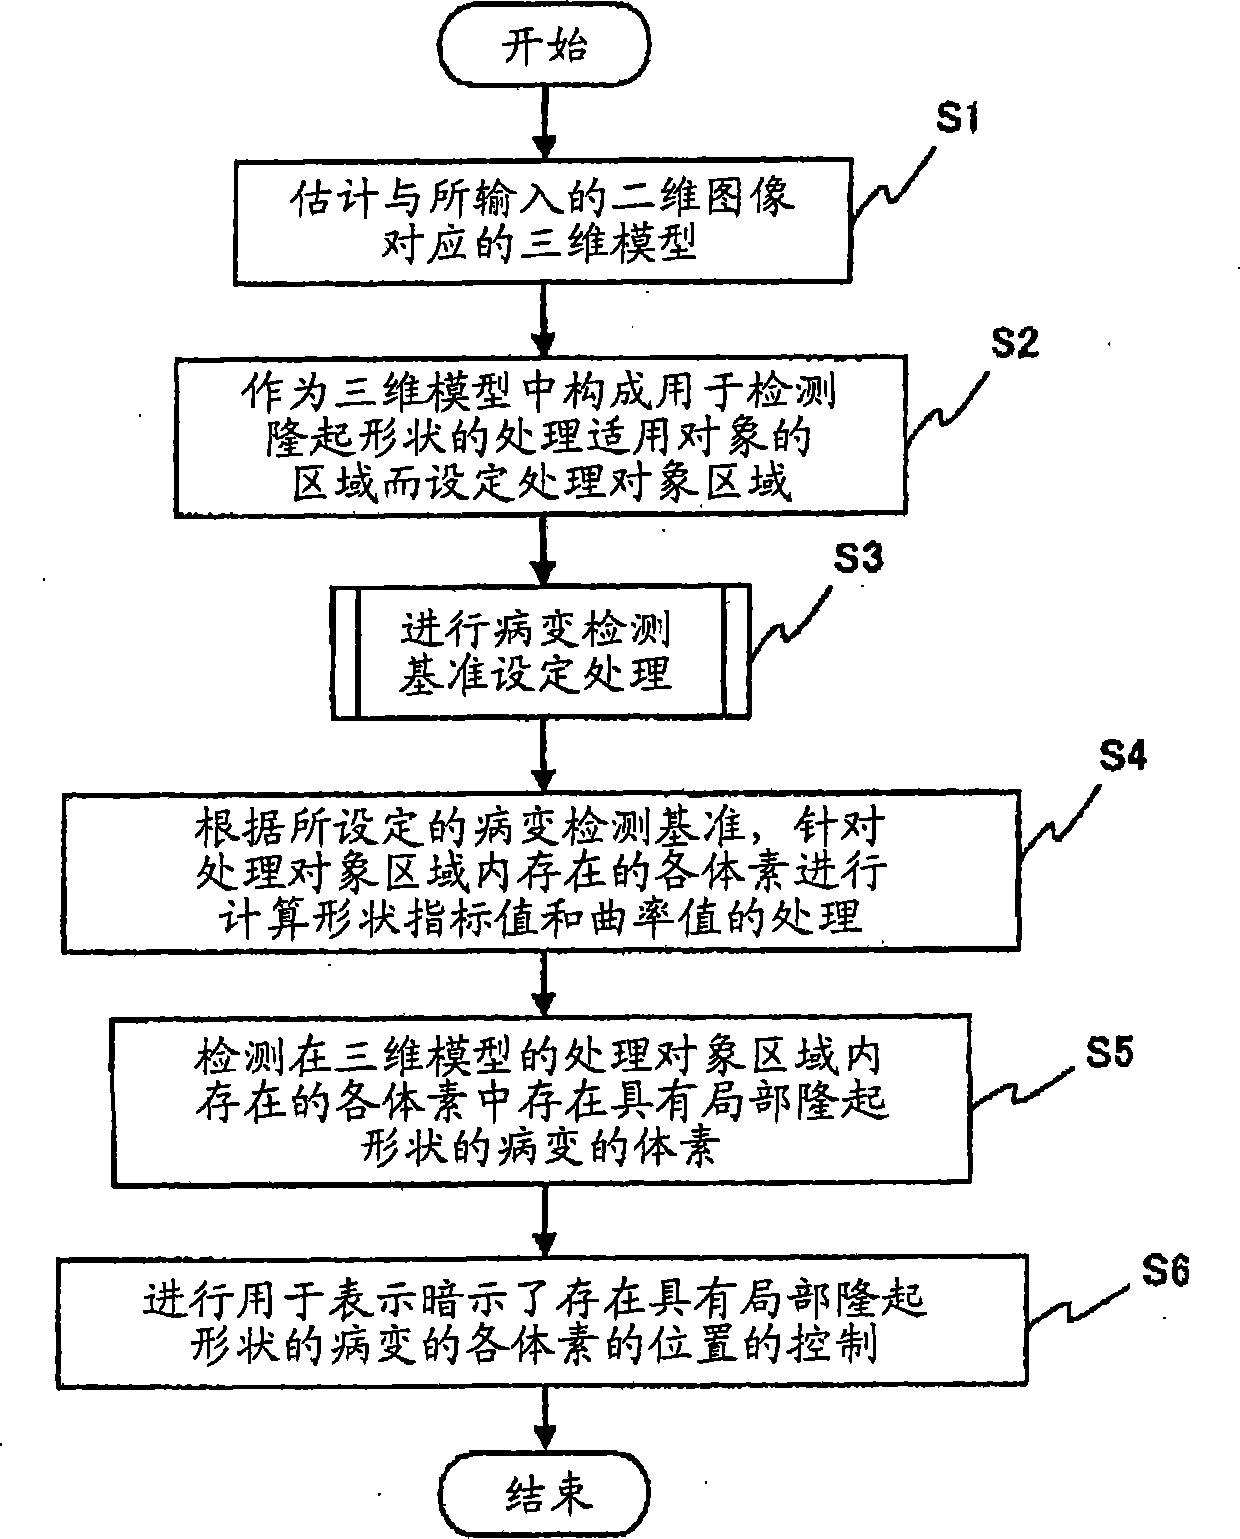 Image processing device for medical use and image processing method for medical use